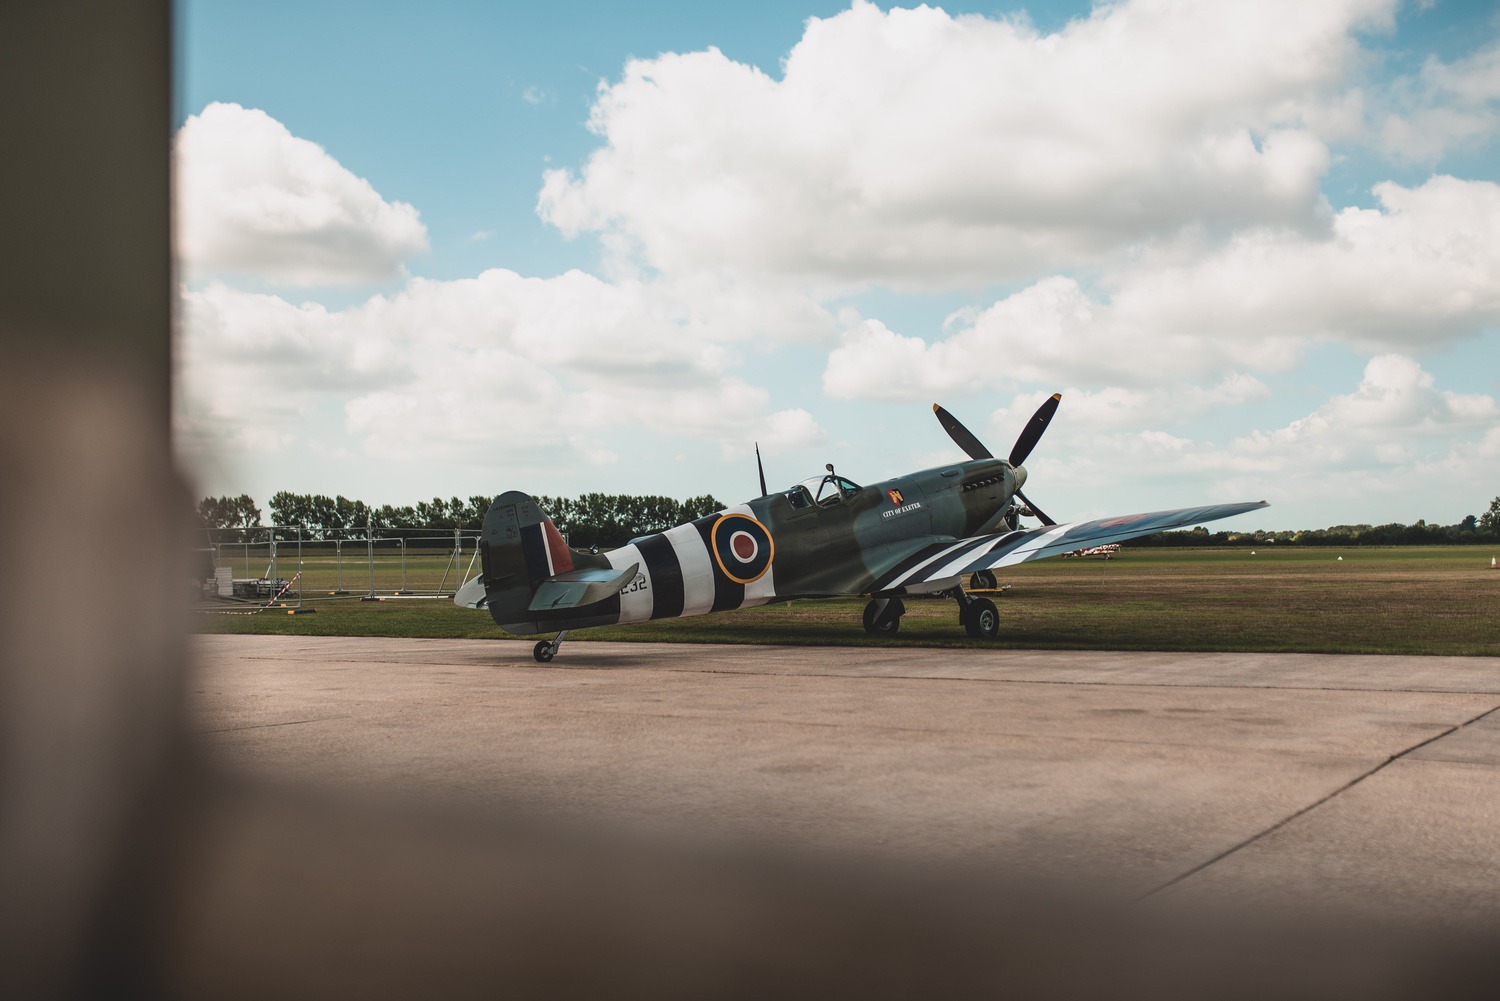 A spitfire in the sun